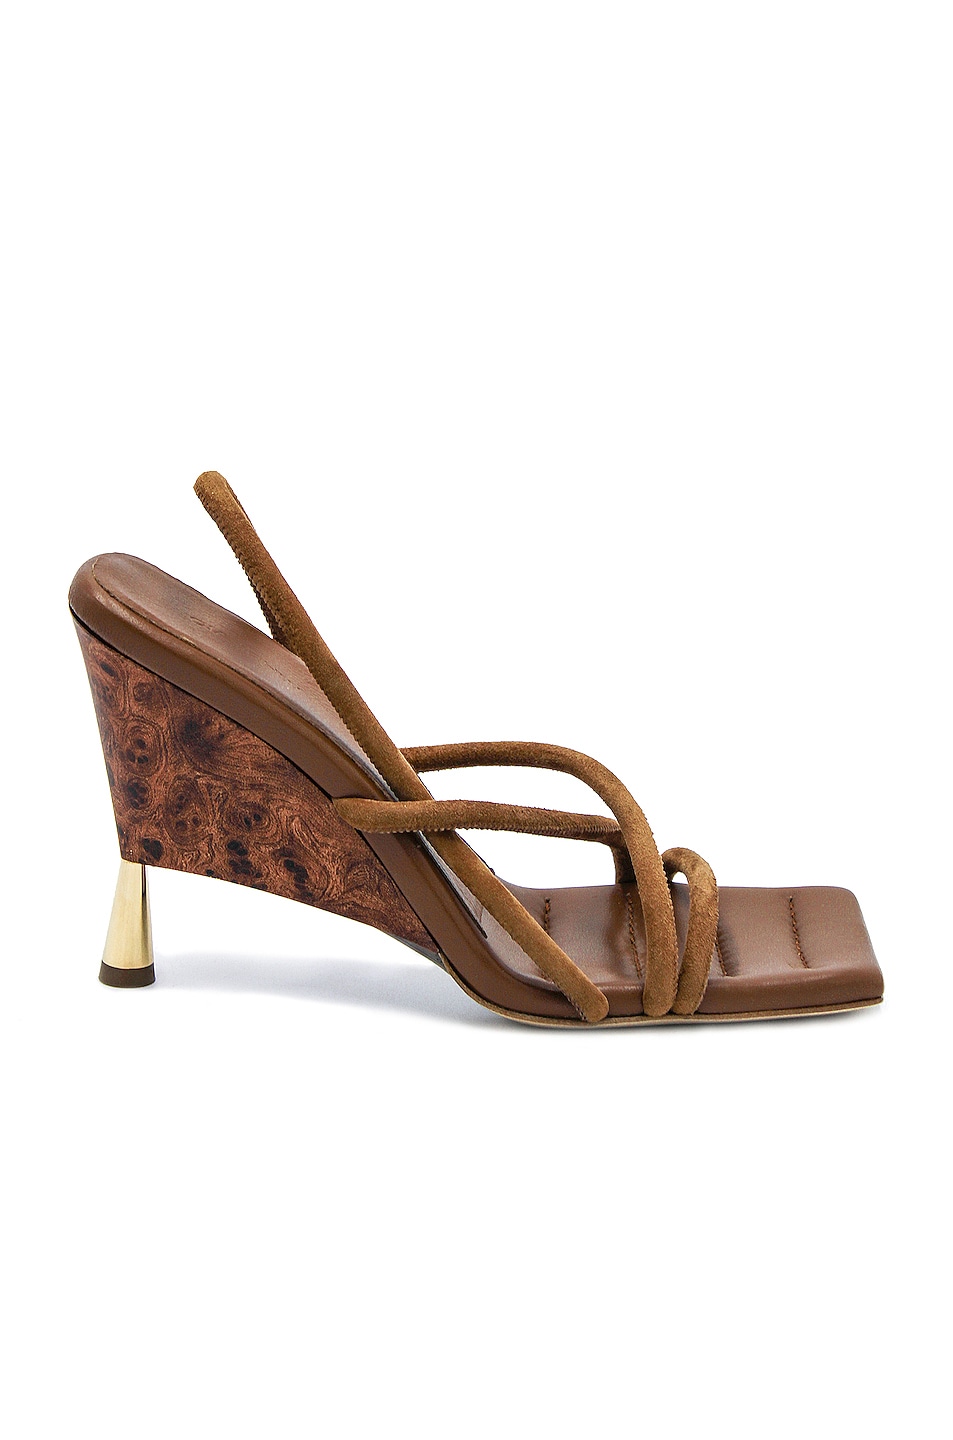 Image 1 of GIA BORGHINI x RHW Strappy Suede Sandal in Cocoa Brown